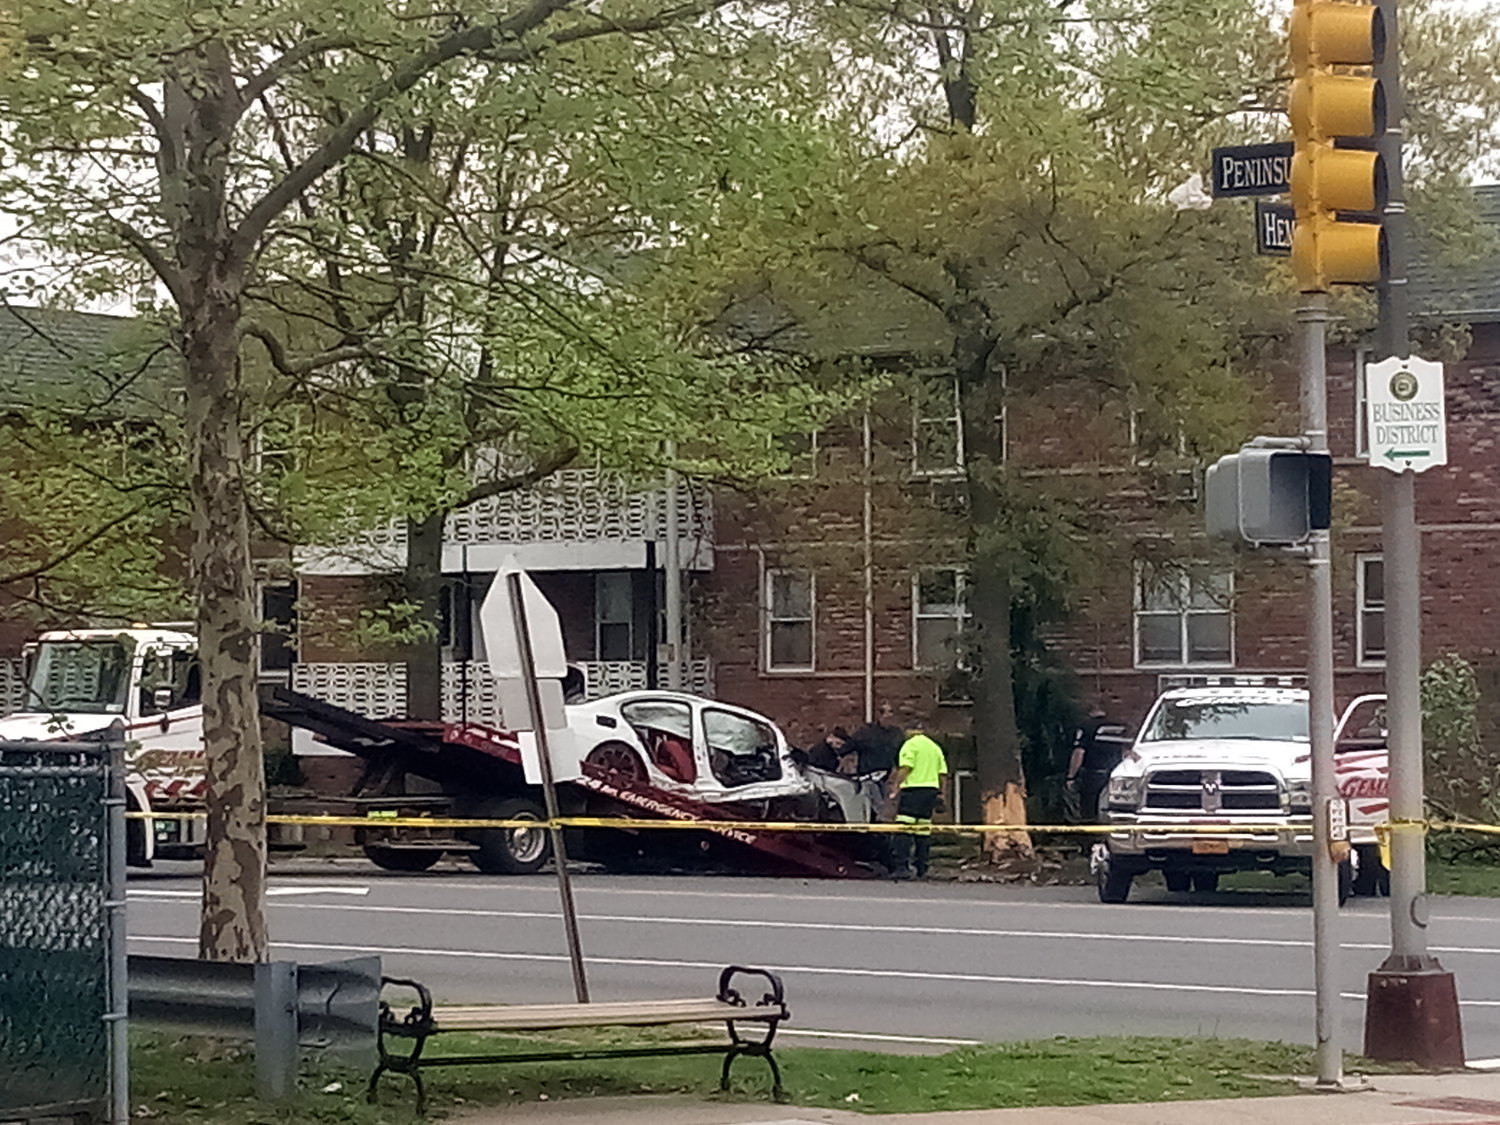 An off-duty NYPD officer was killed in an early morning car crash in Lynbrook on Wednesday.